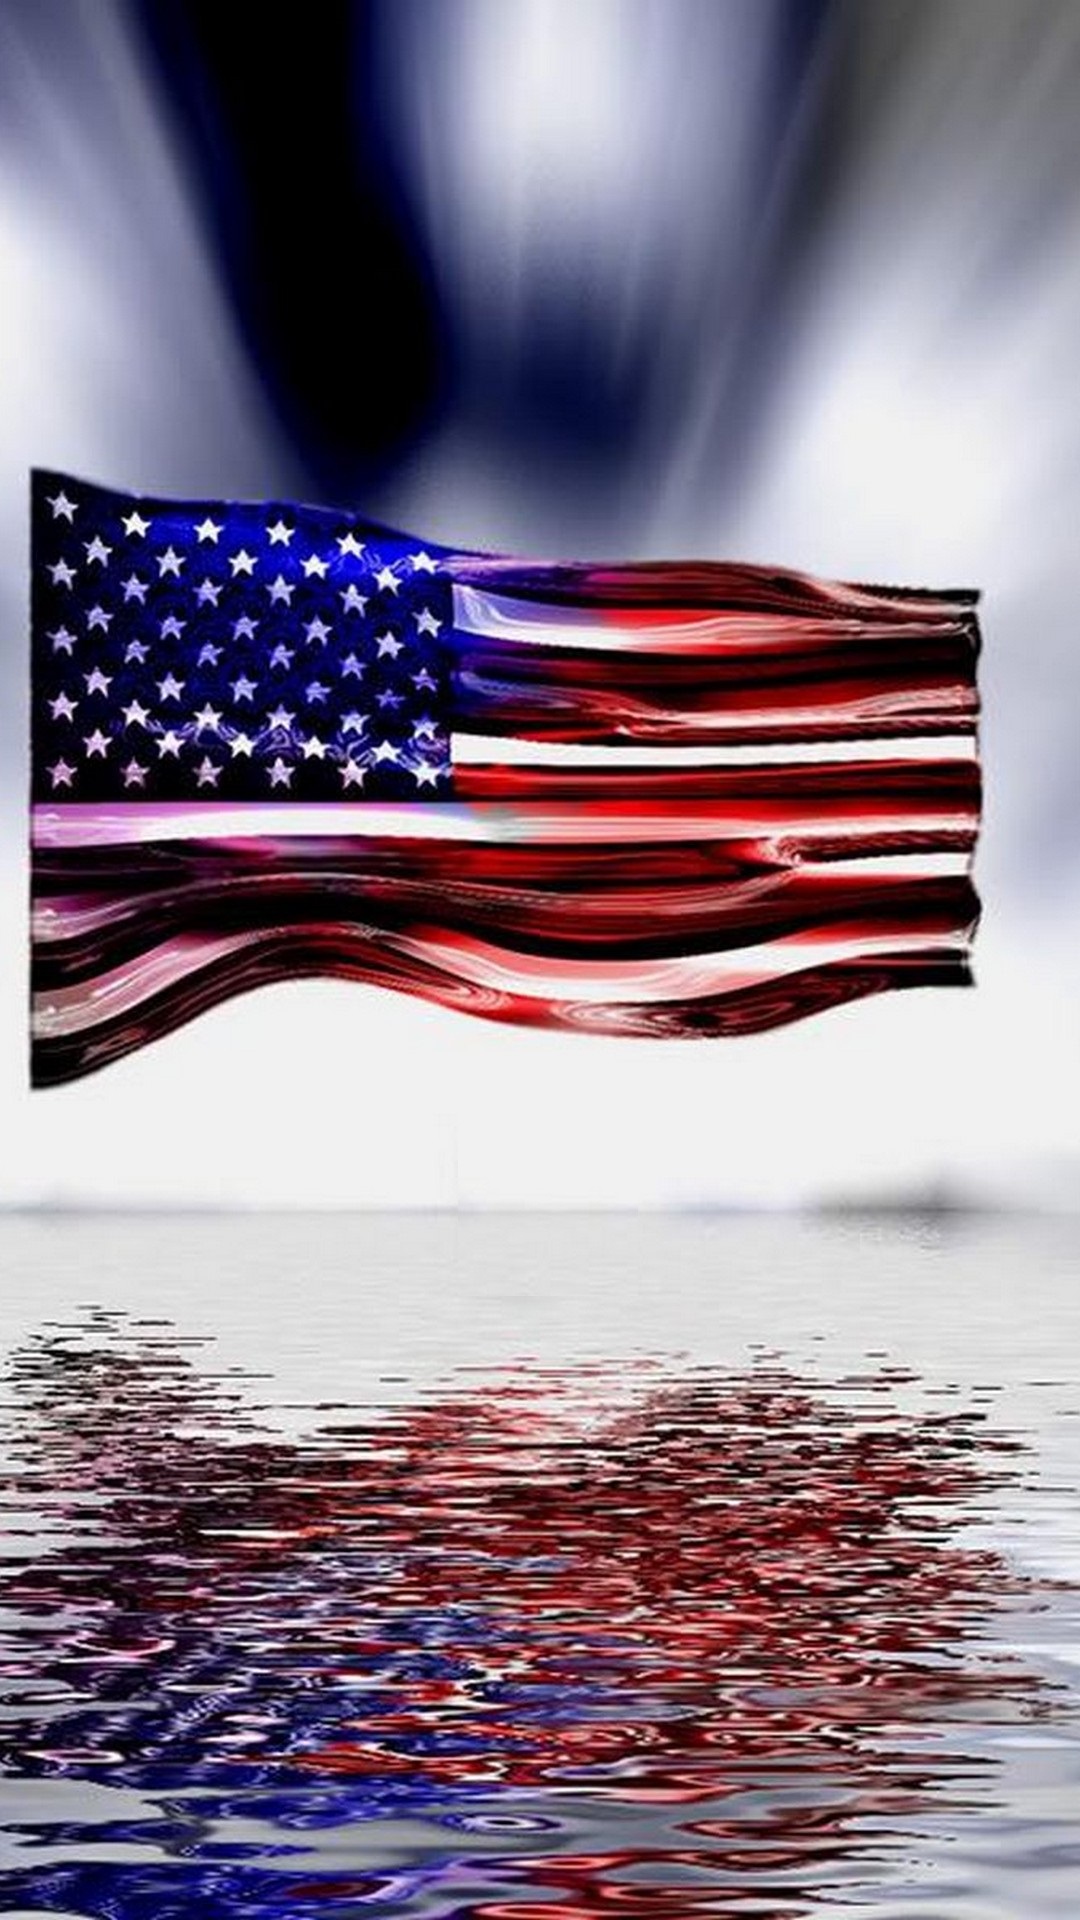 American Flag iPhone Wallpaper in HD with high-resolution 1080x1920 pixel. You can set as wallpaper for Apple iPhone X, XS Max, XR, 8, 7, 6, SE, iPad. Enjoy and share your favorite HD wallpapers and background images